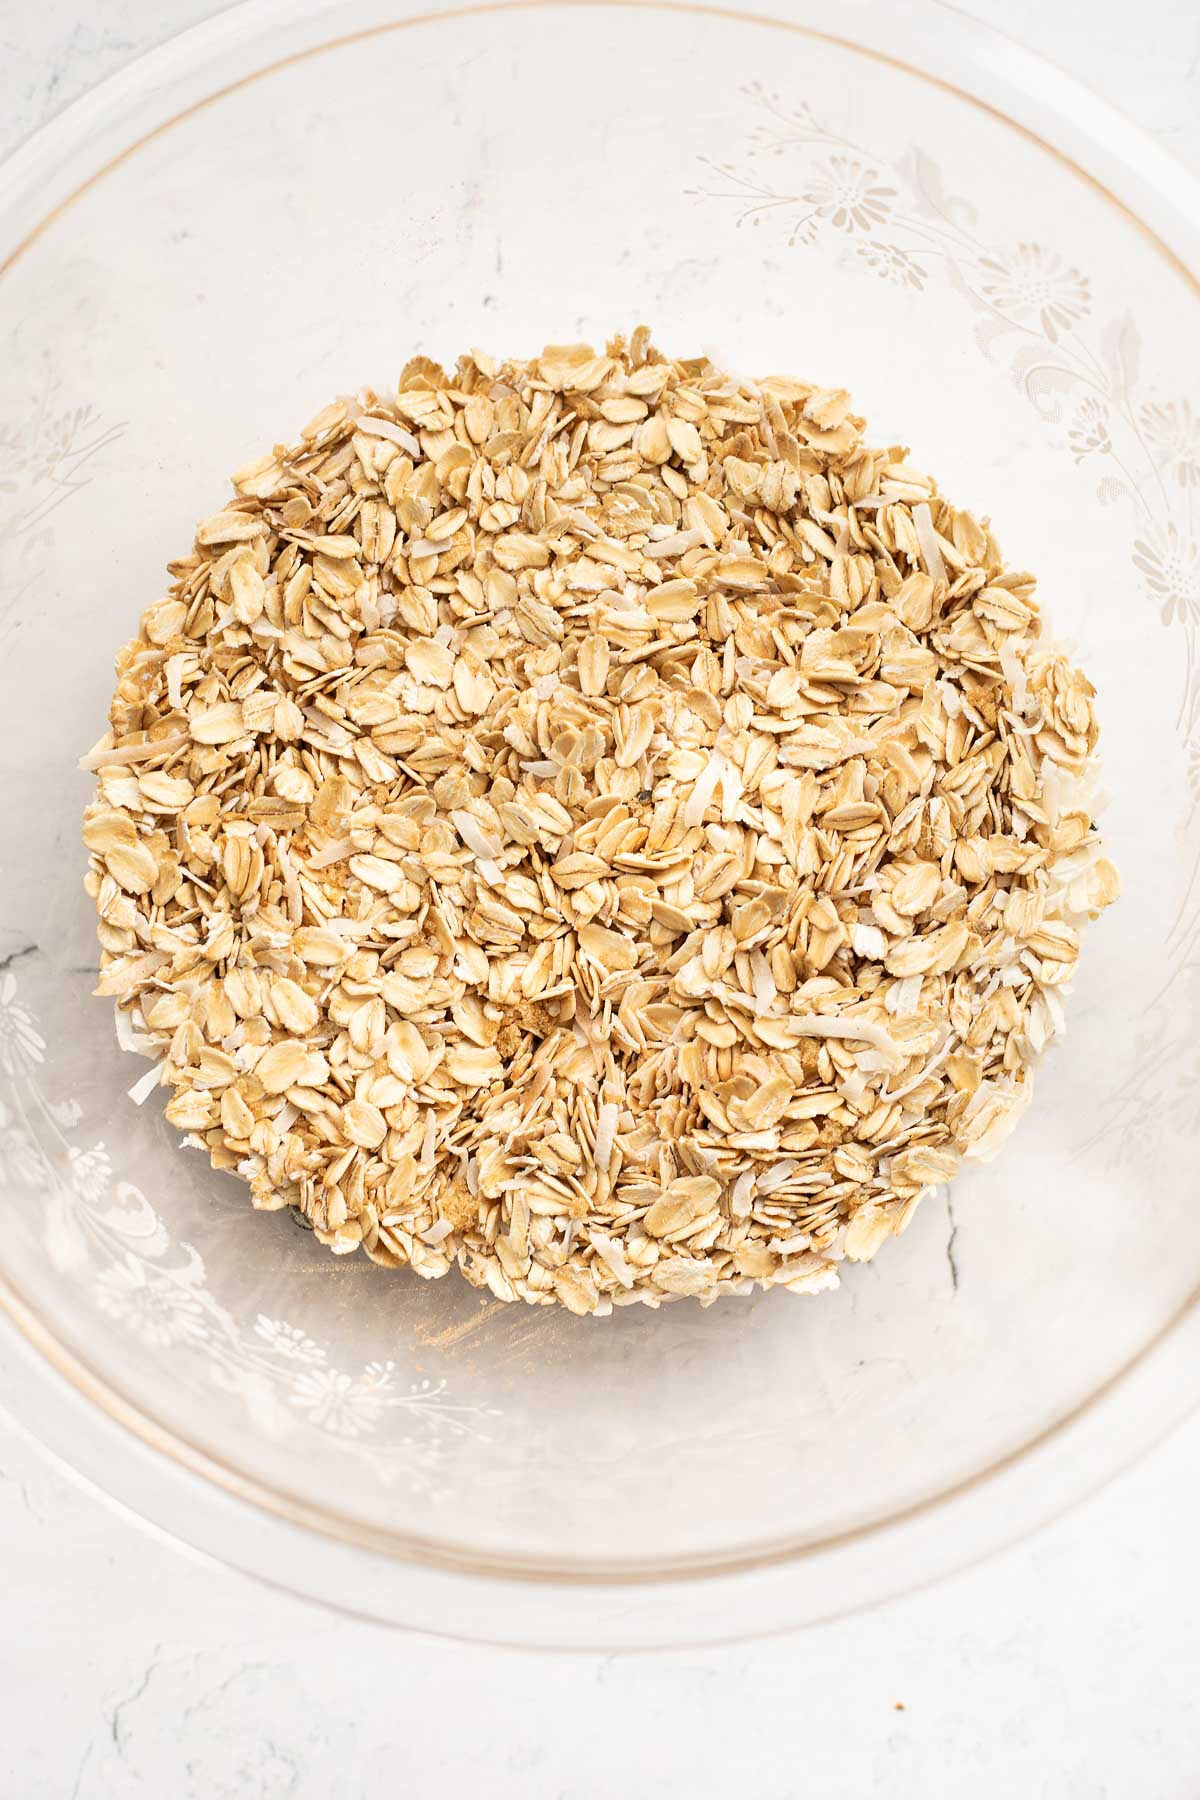 Oats and brown sugar in a glass bowl.